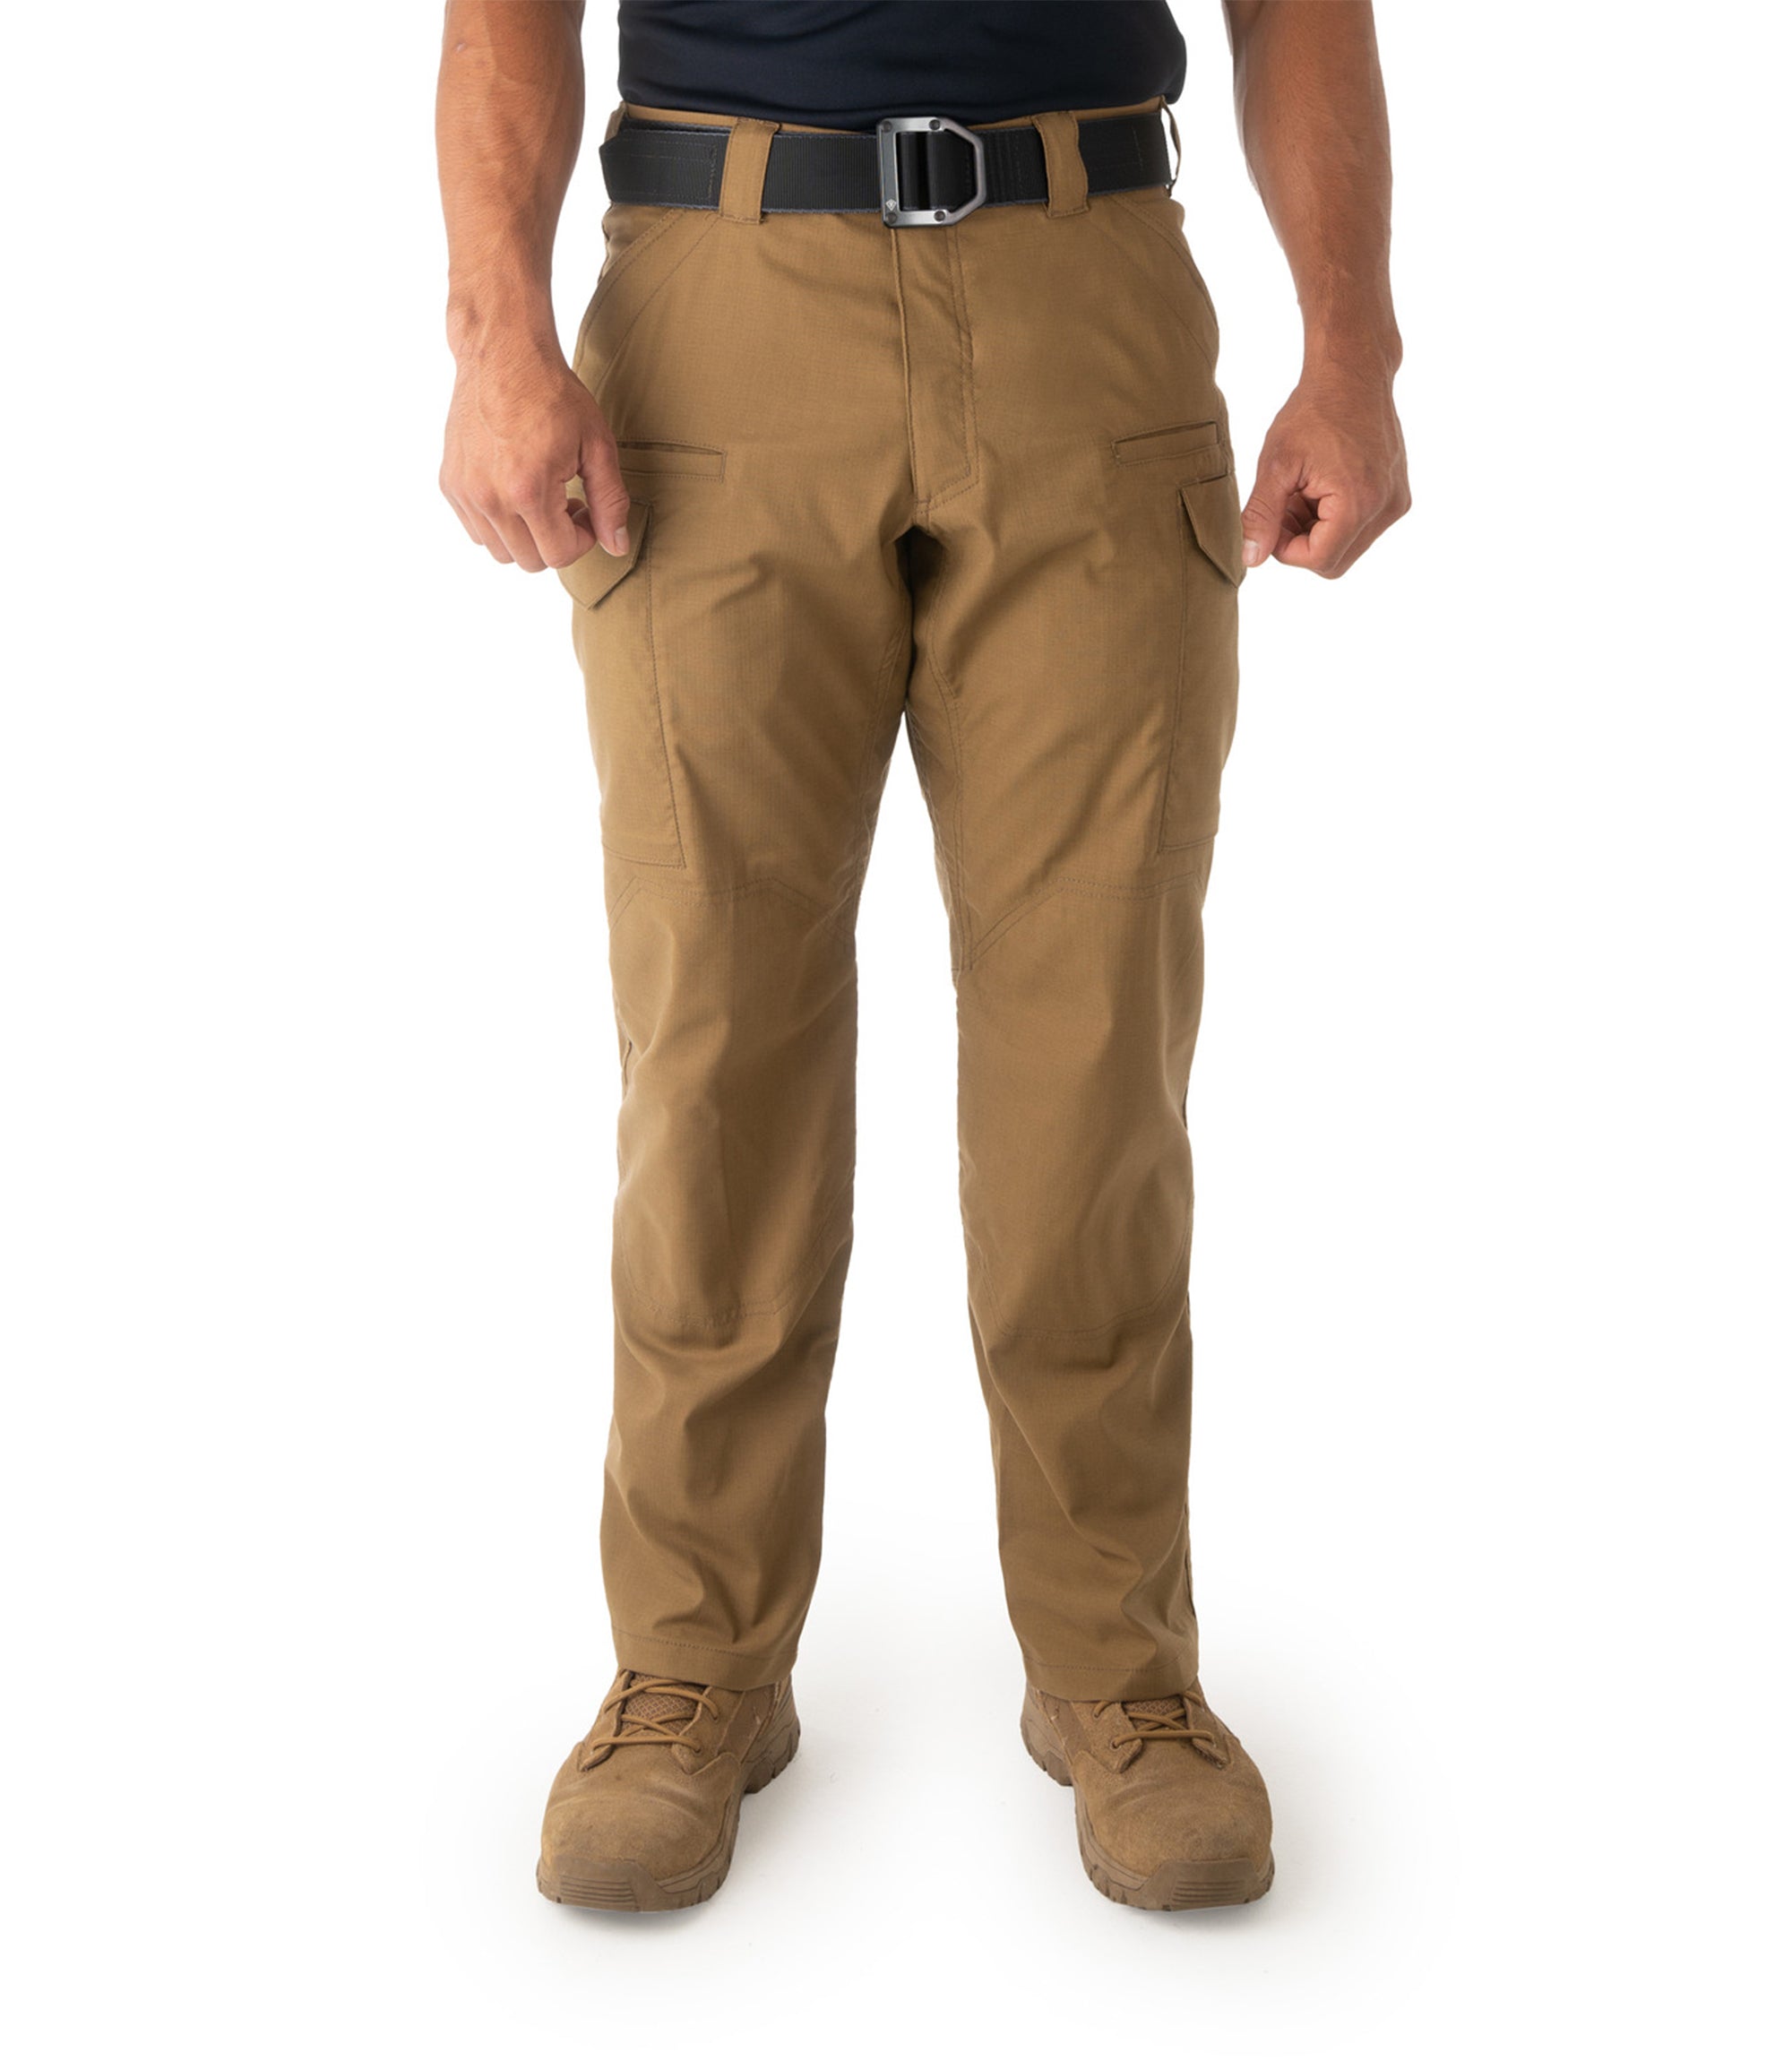 Men's V2 Tactical Pants - Coyote Brown – First Tactical